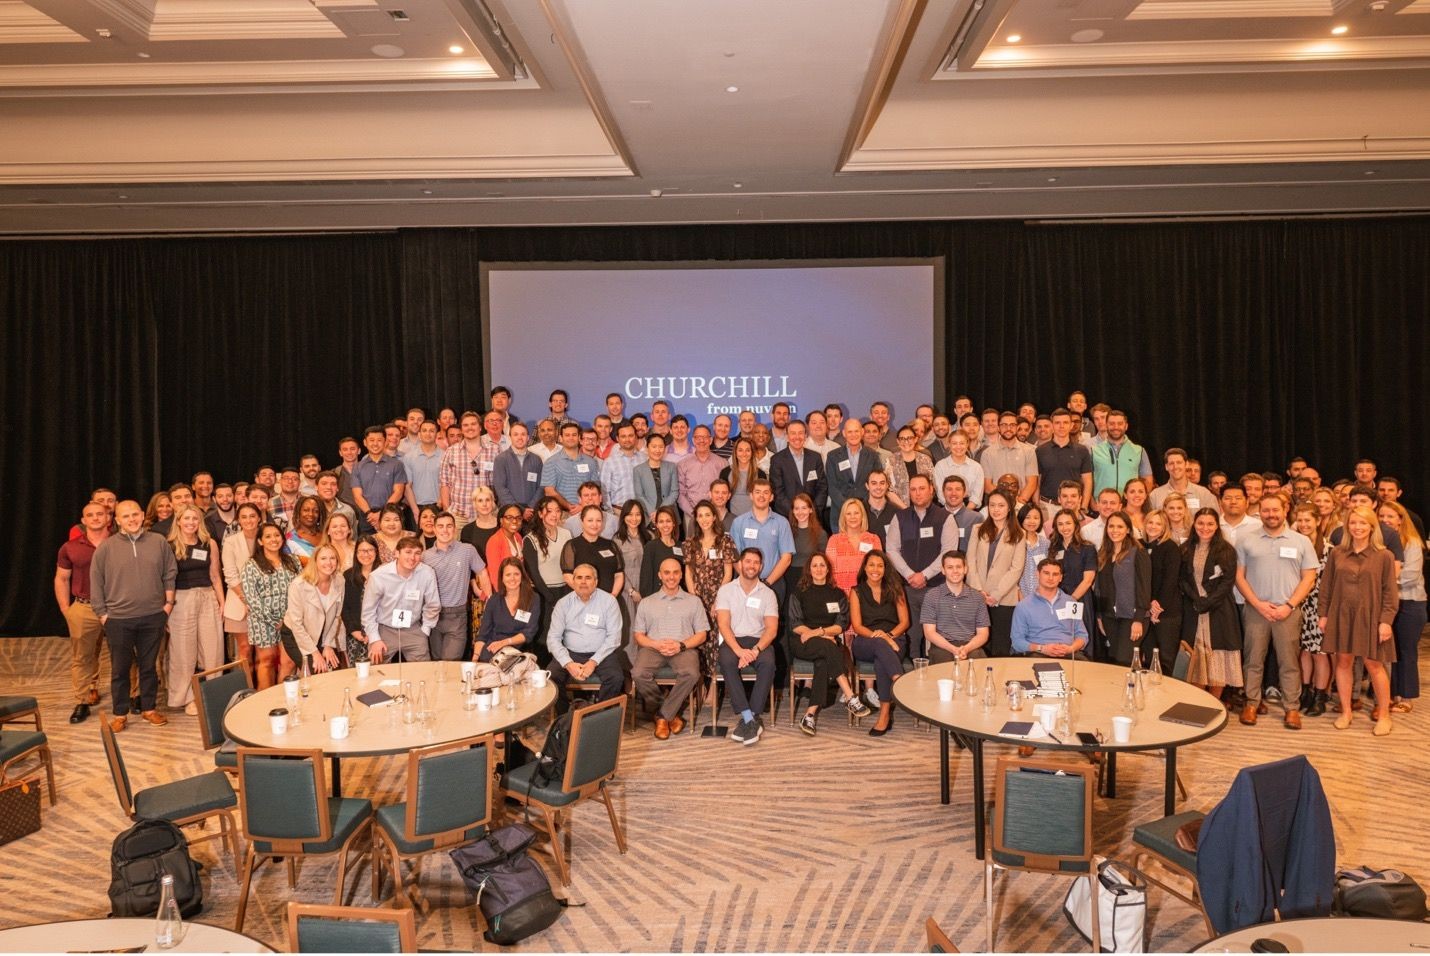 Had a great firm offsite in Florida—days of unity, connection, and mutual learning.
